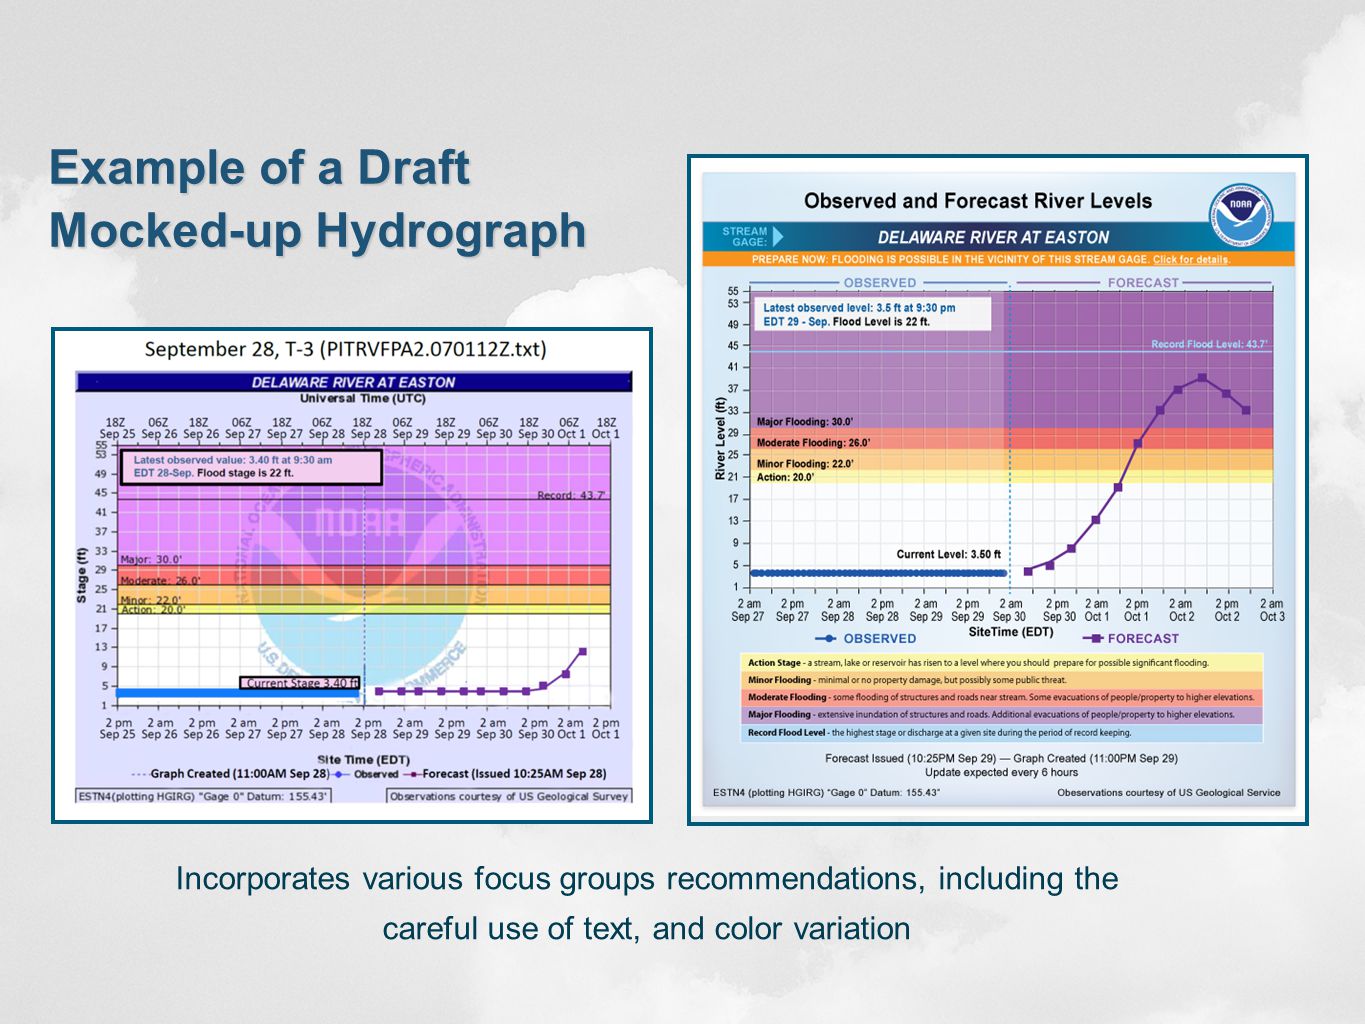 Example of a Draft Mocked-up Hydrograph Incorporates various focus groups recommendations, including the careful use of text, and color variation